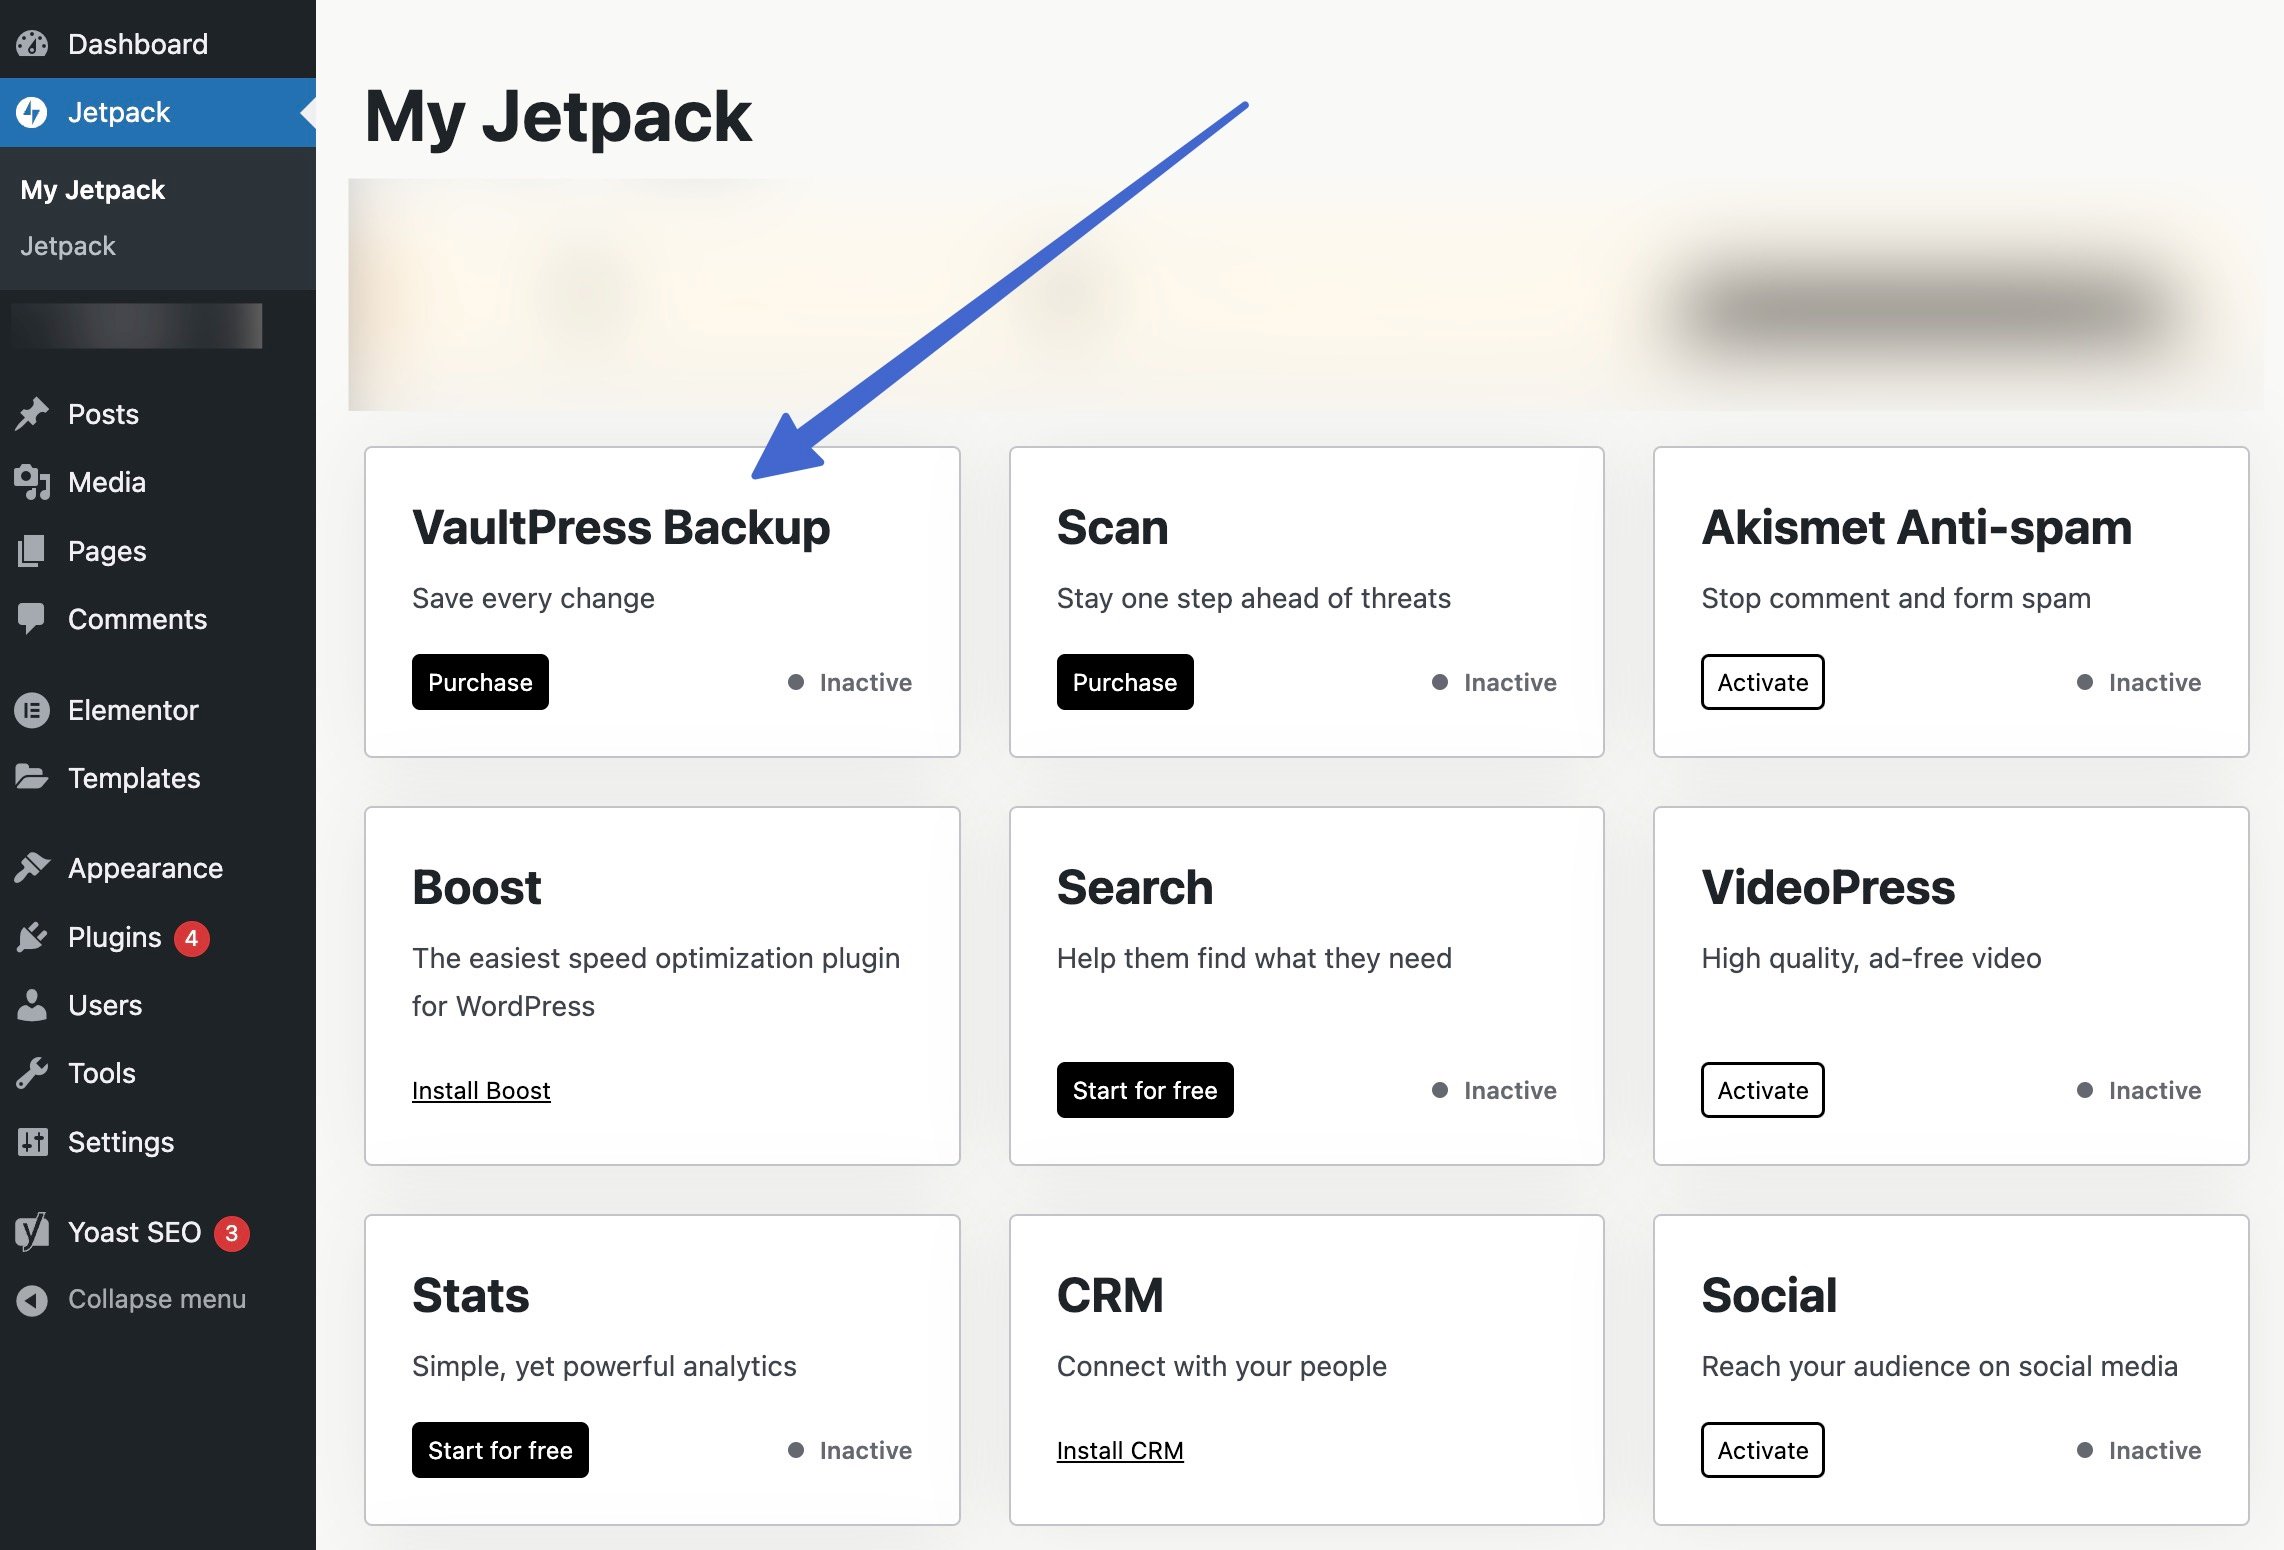 My Jetpack page and finding VaultPress Backup feature when comparing UpdraftPlus vs Jetpack.